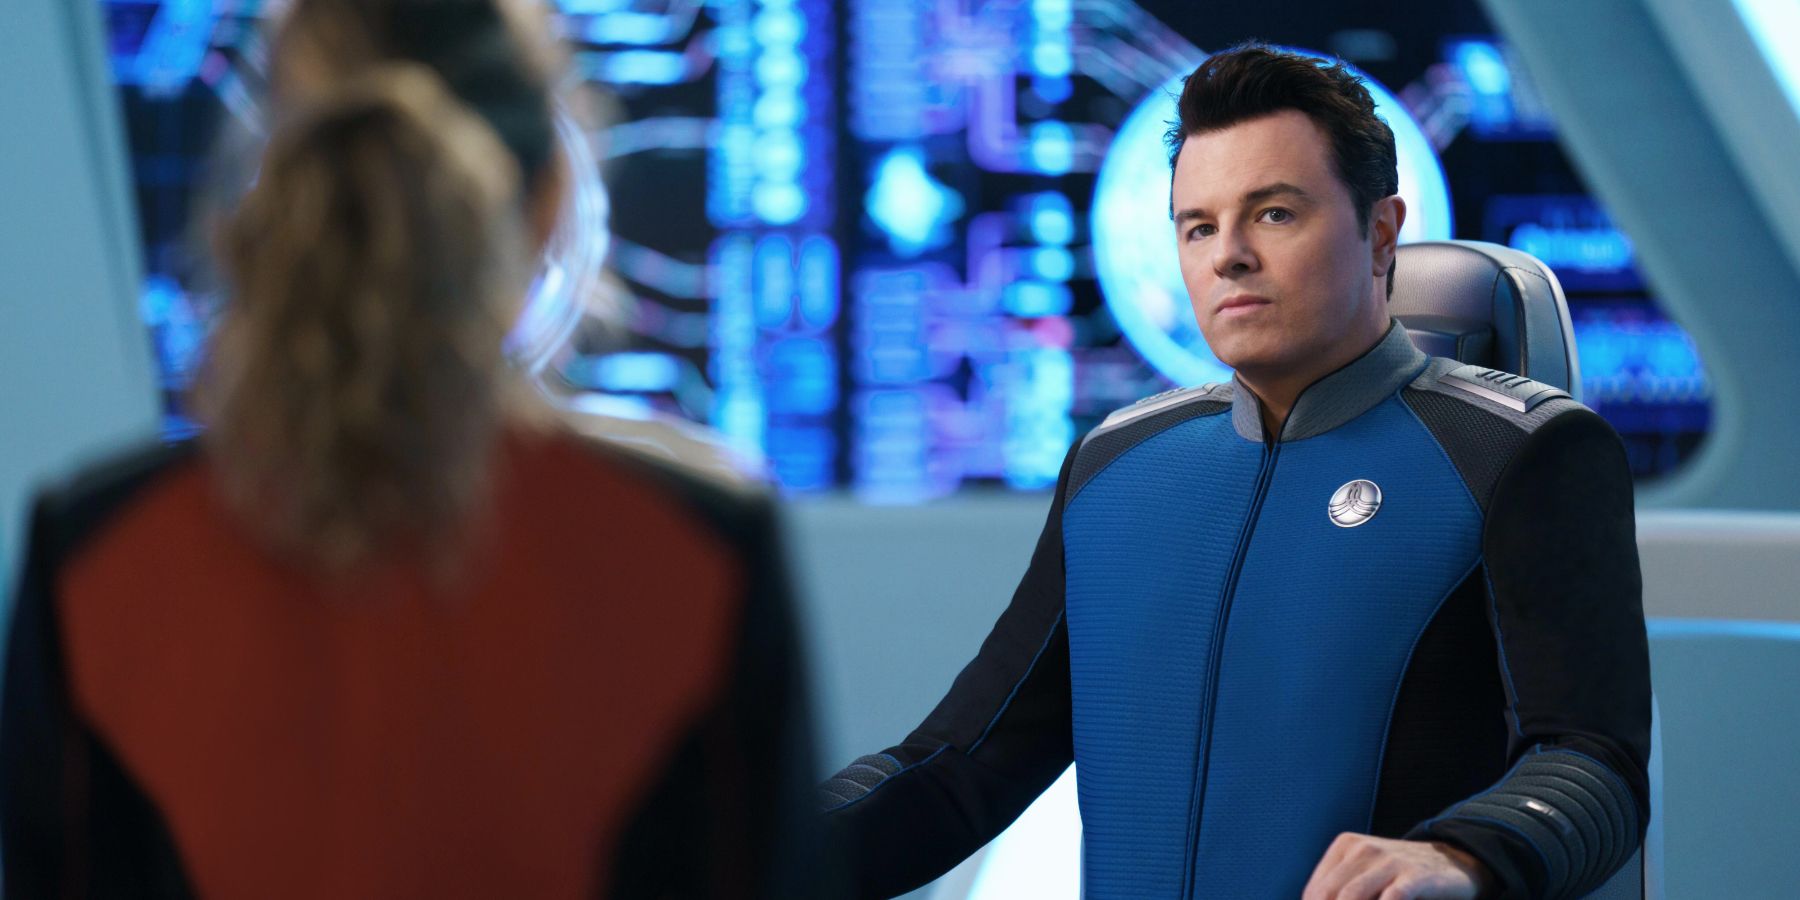 The Orville Season 4 Would Break 1 Show Record, And Reveals A Problem With McFarlane's Sci-Fi Returning